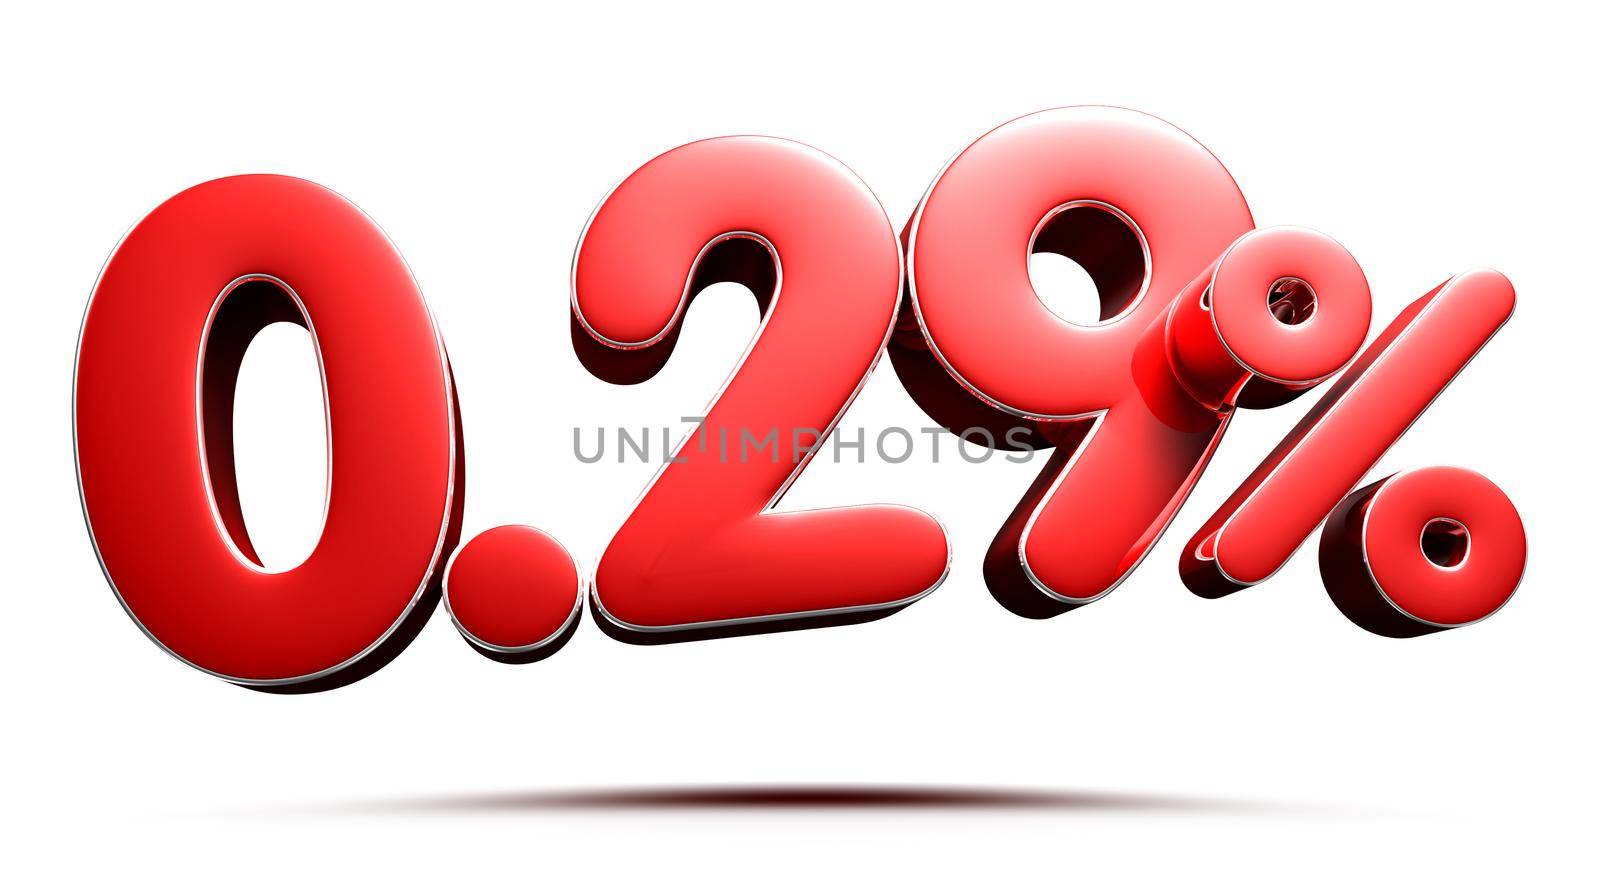 0.29 percent red on white background illustration 3D rendering with clipping path.